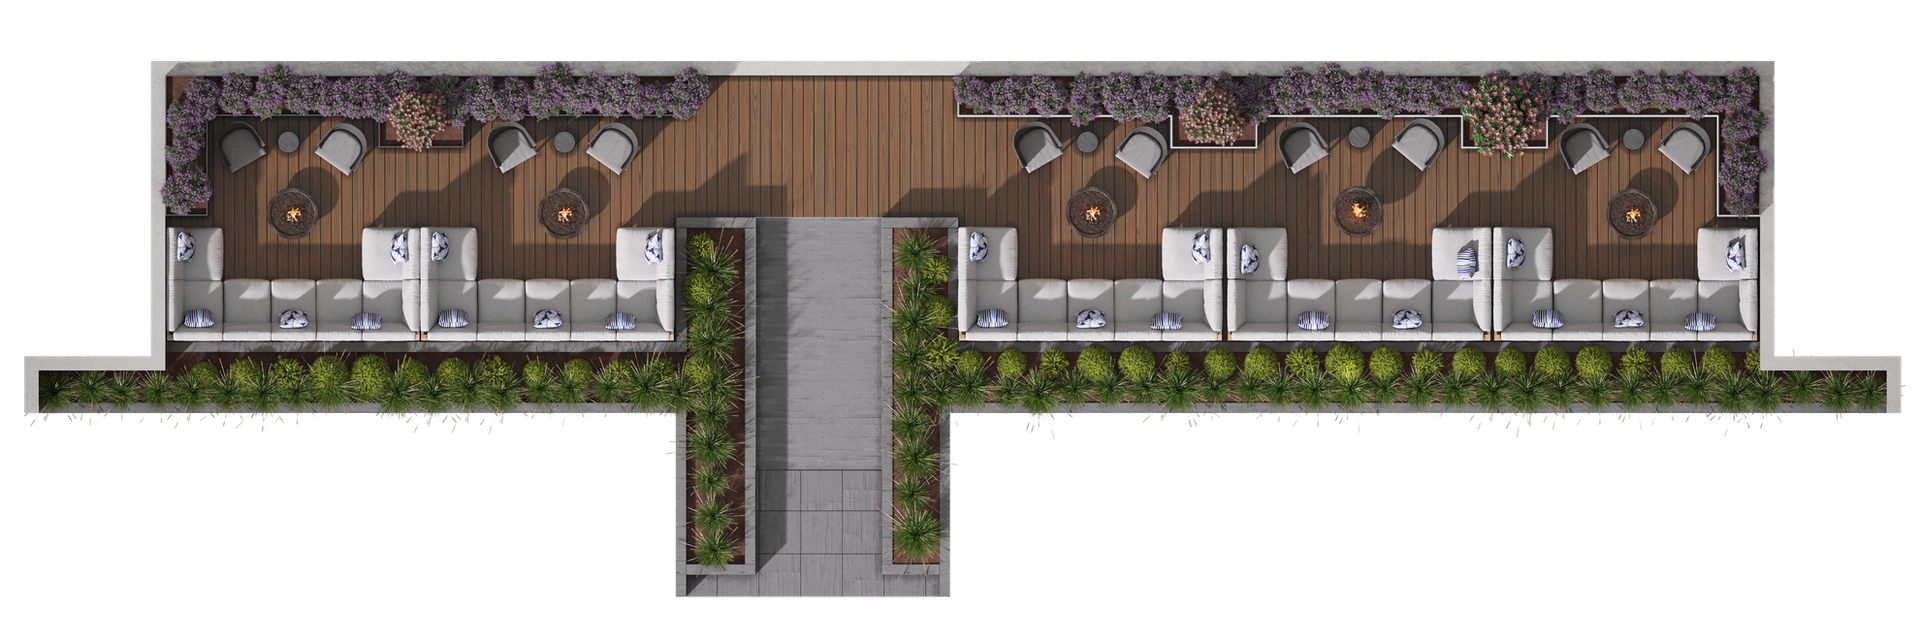 Level Hollywood - Outdoor Roofdeck